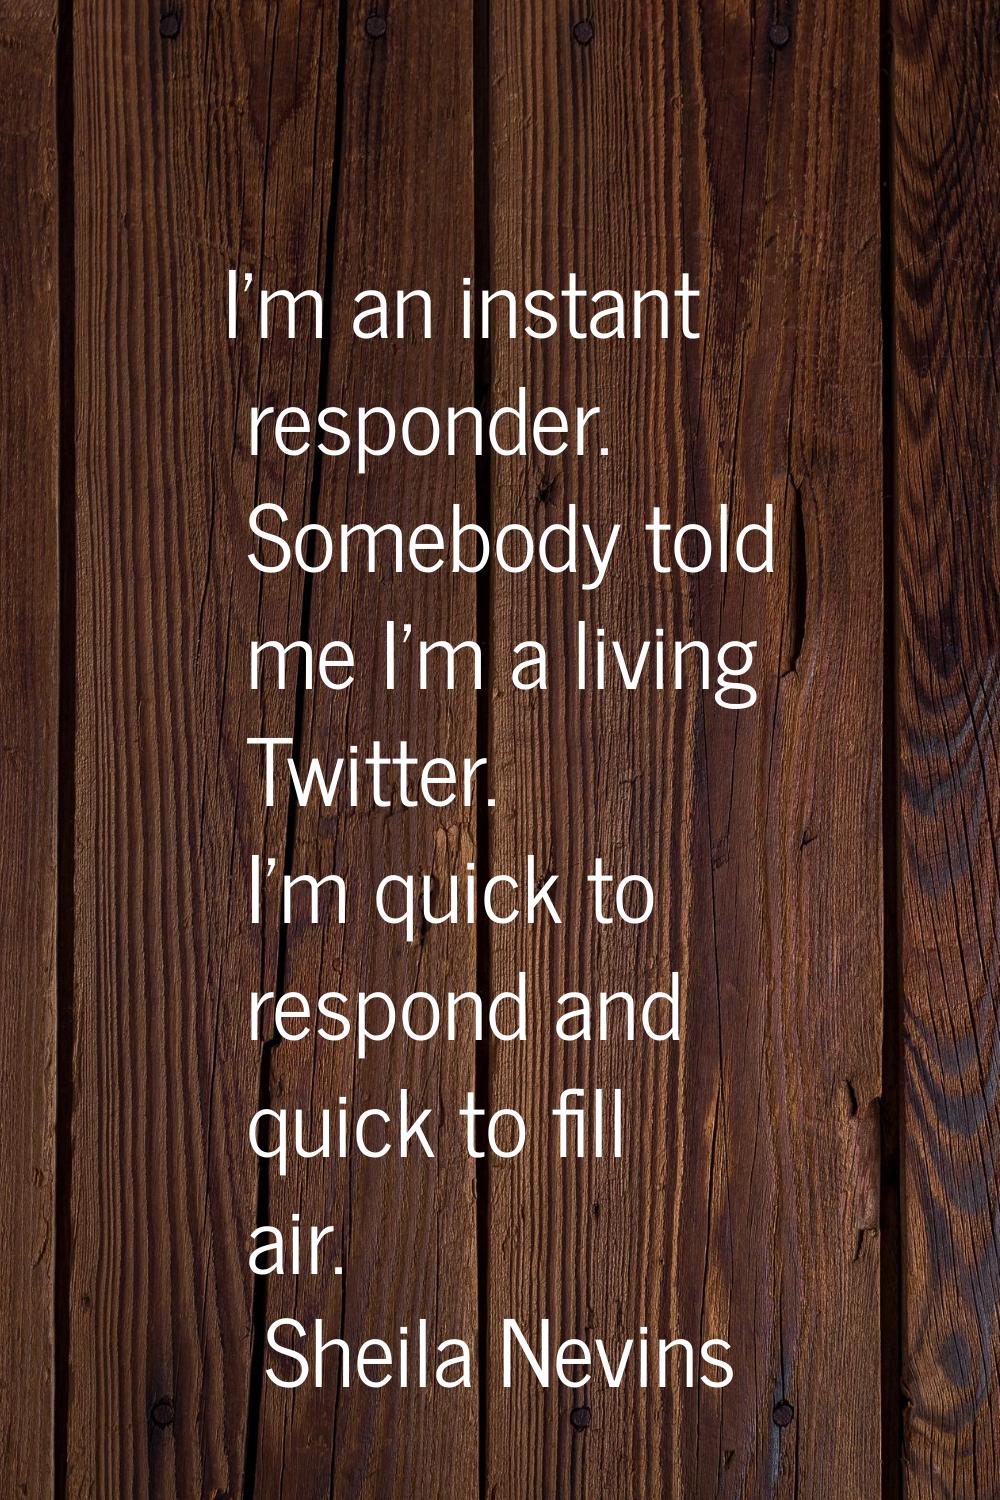 I'm an instant responder. Somebody told me I'm a living Twitter. I'm quick to respond and quick to 